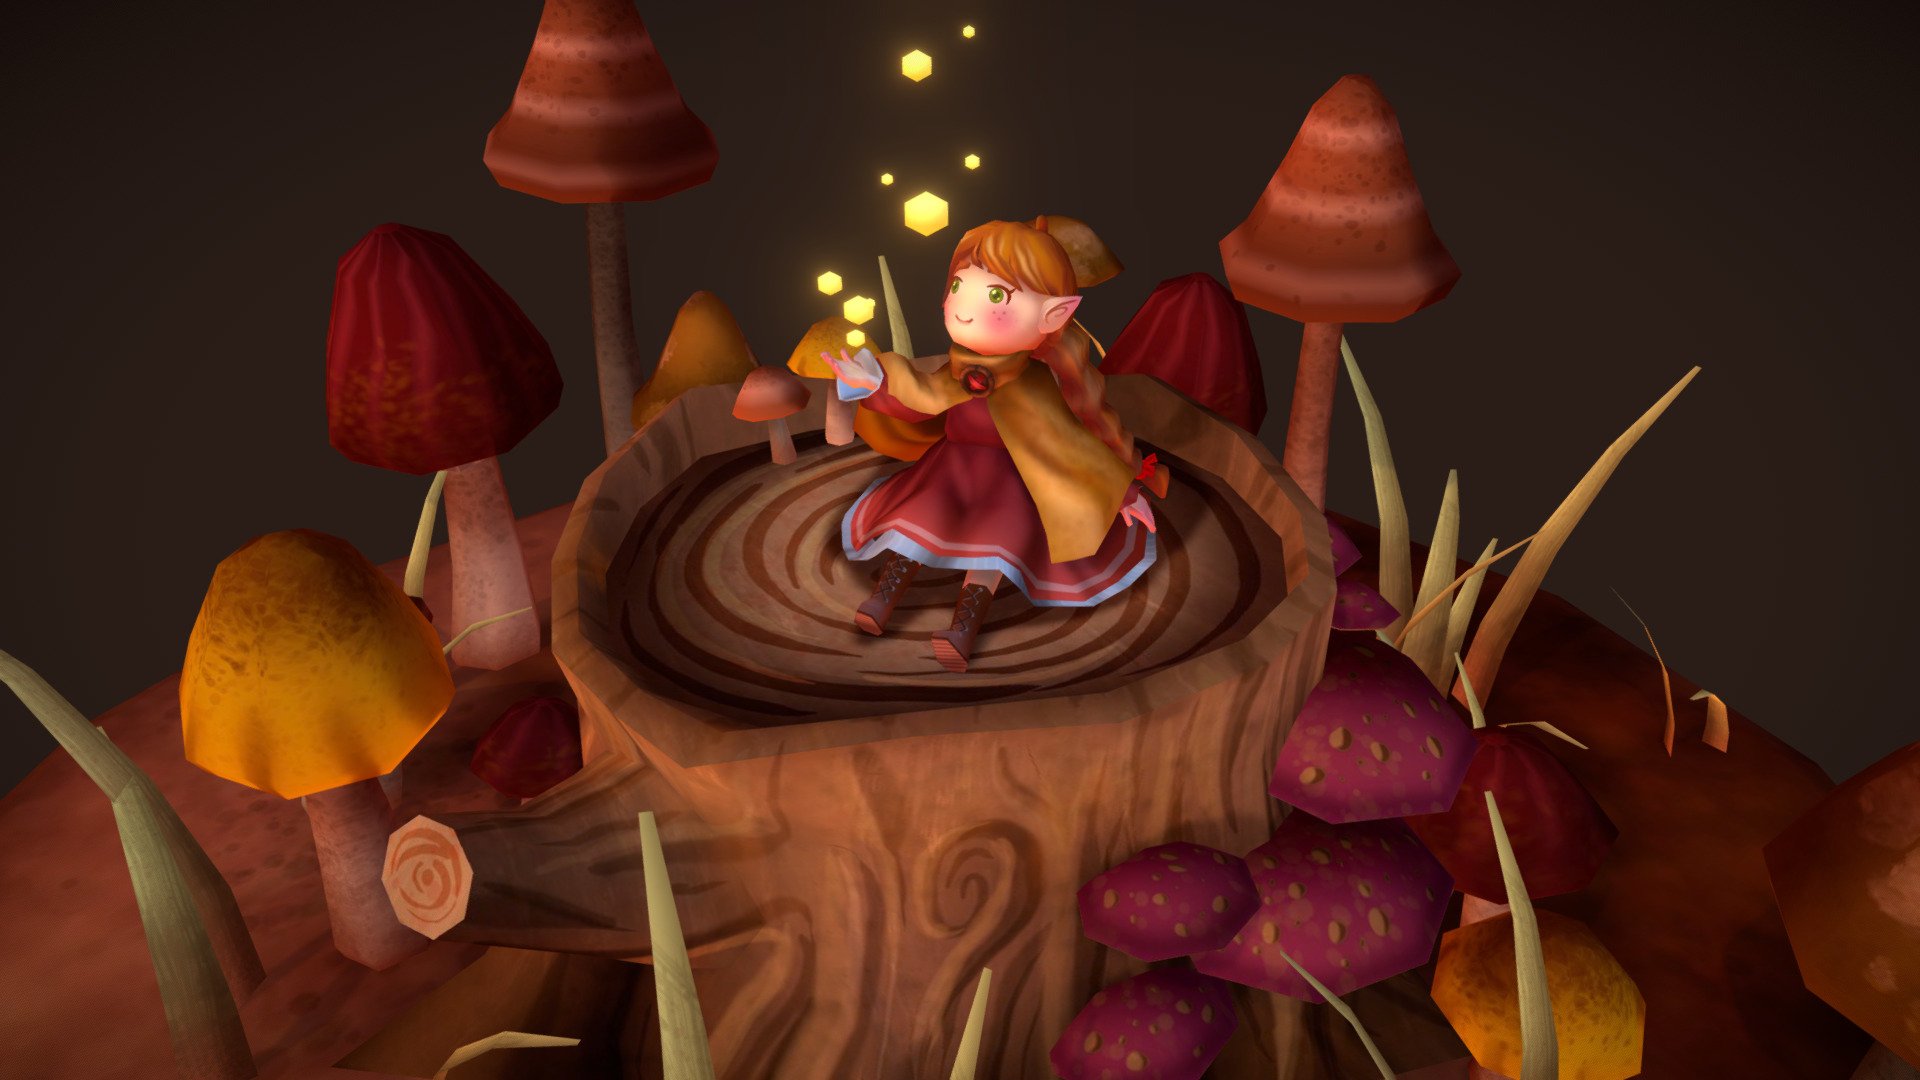 A little autumn scene for my entry in the #MushroomChallenge .
It was really funny to work on this topic.

I added this project on my artstation with the concept art if you are interested
https://www.artstation.com/artwork/A9WAEz - The mushroom stump - 3D model by Mokastral 3d model